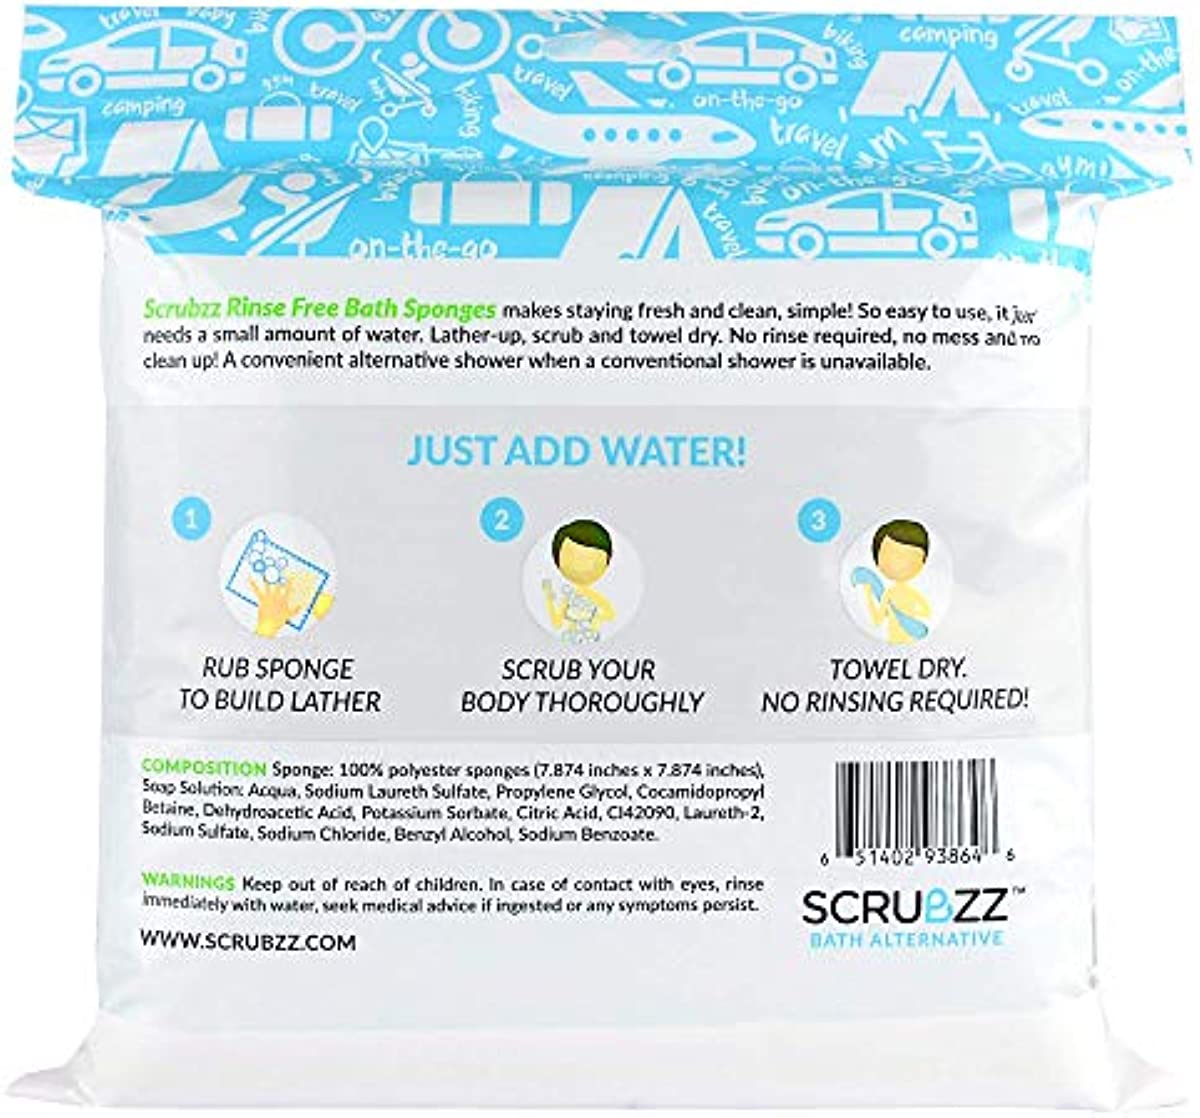 Scrubzz Disposable Rinse Free Bathing Wipes - 25 Pack - All-in-1 Single Use Shower Wipes, Simply Dampen, Lather, and Dry Without Shampoo or Rinsing